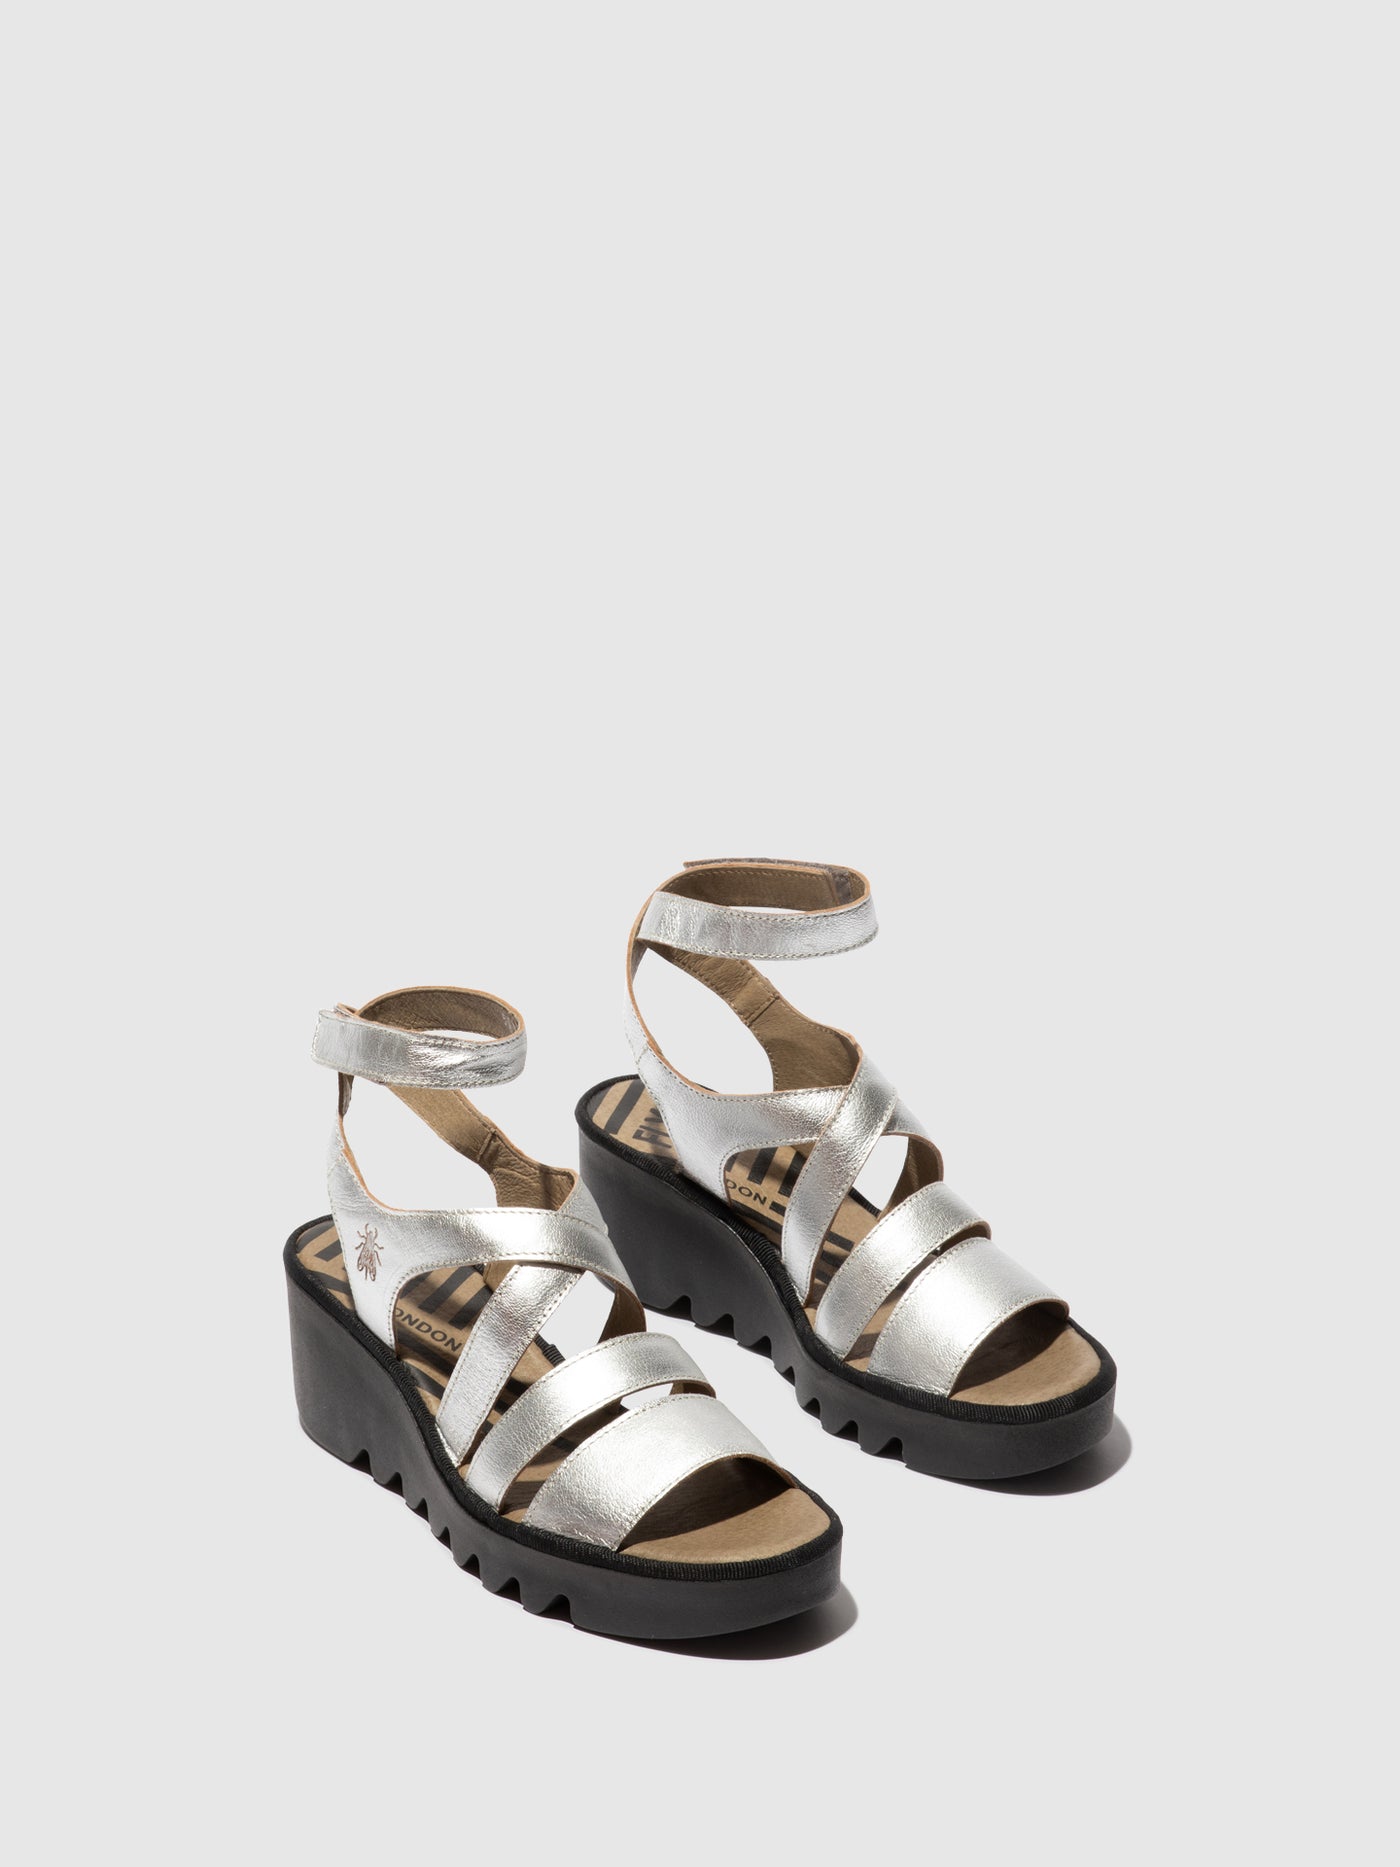 Strappy Sandals BAFY485FLY SILVER